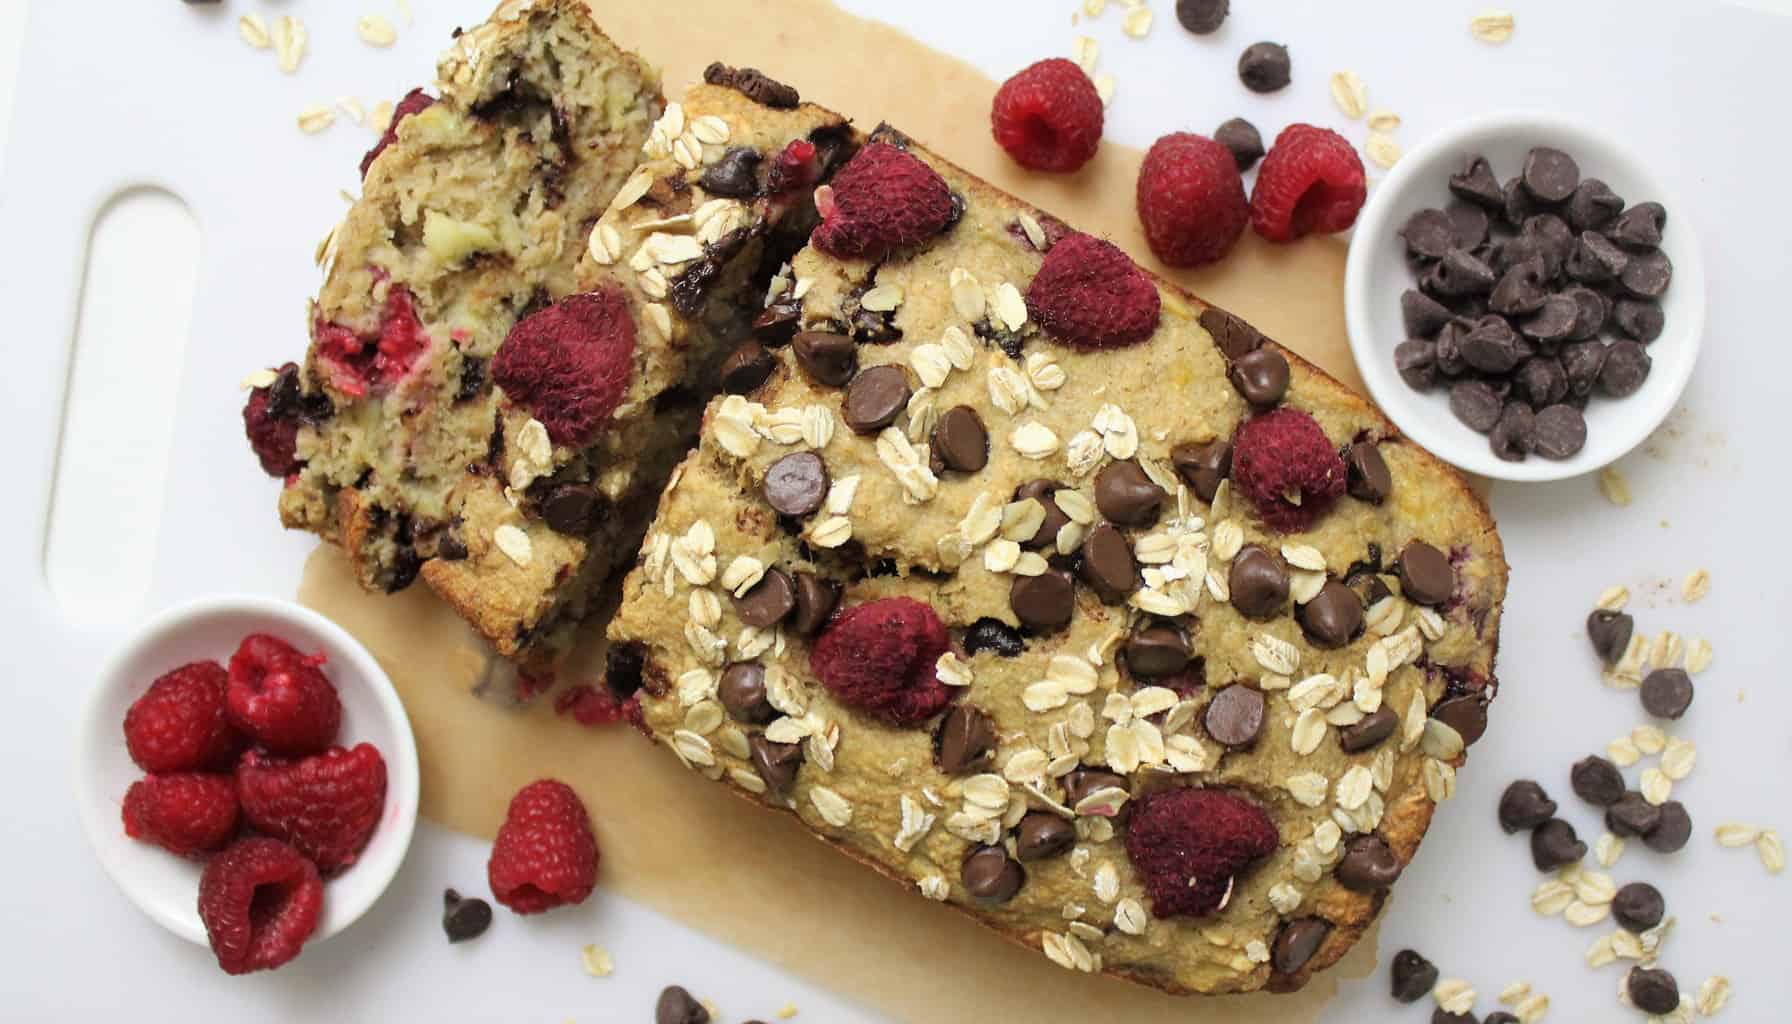 This gluten free & dairy free Raspberry Dark Chocolate Banana Bread is a delicious way to dress up a classic recipe. The berries & chocolate feel fancy, while adding some delicious flavor as well as anti-oxidants to this tasty loaf!